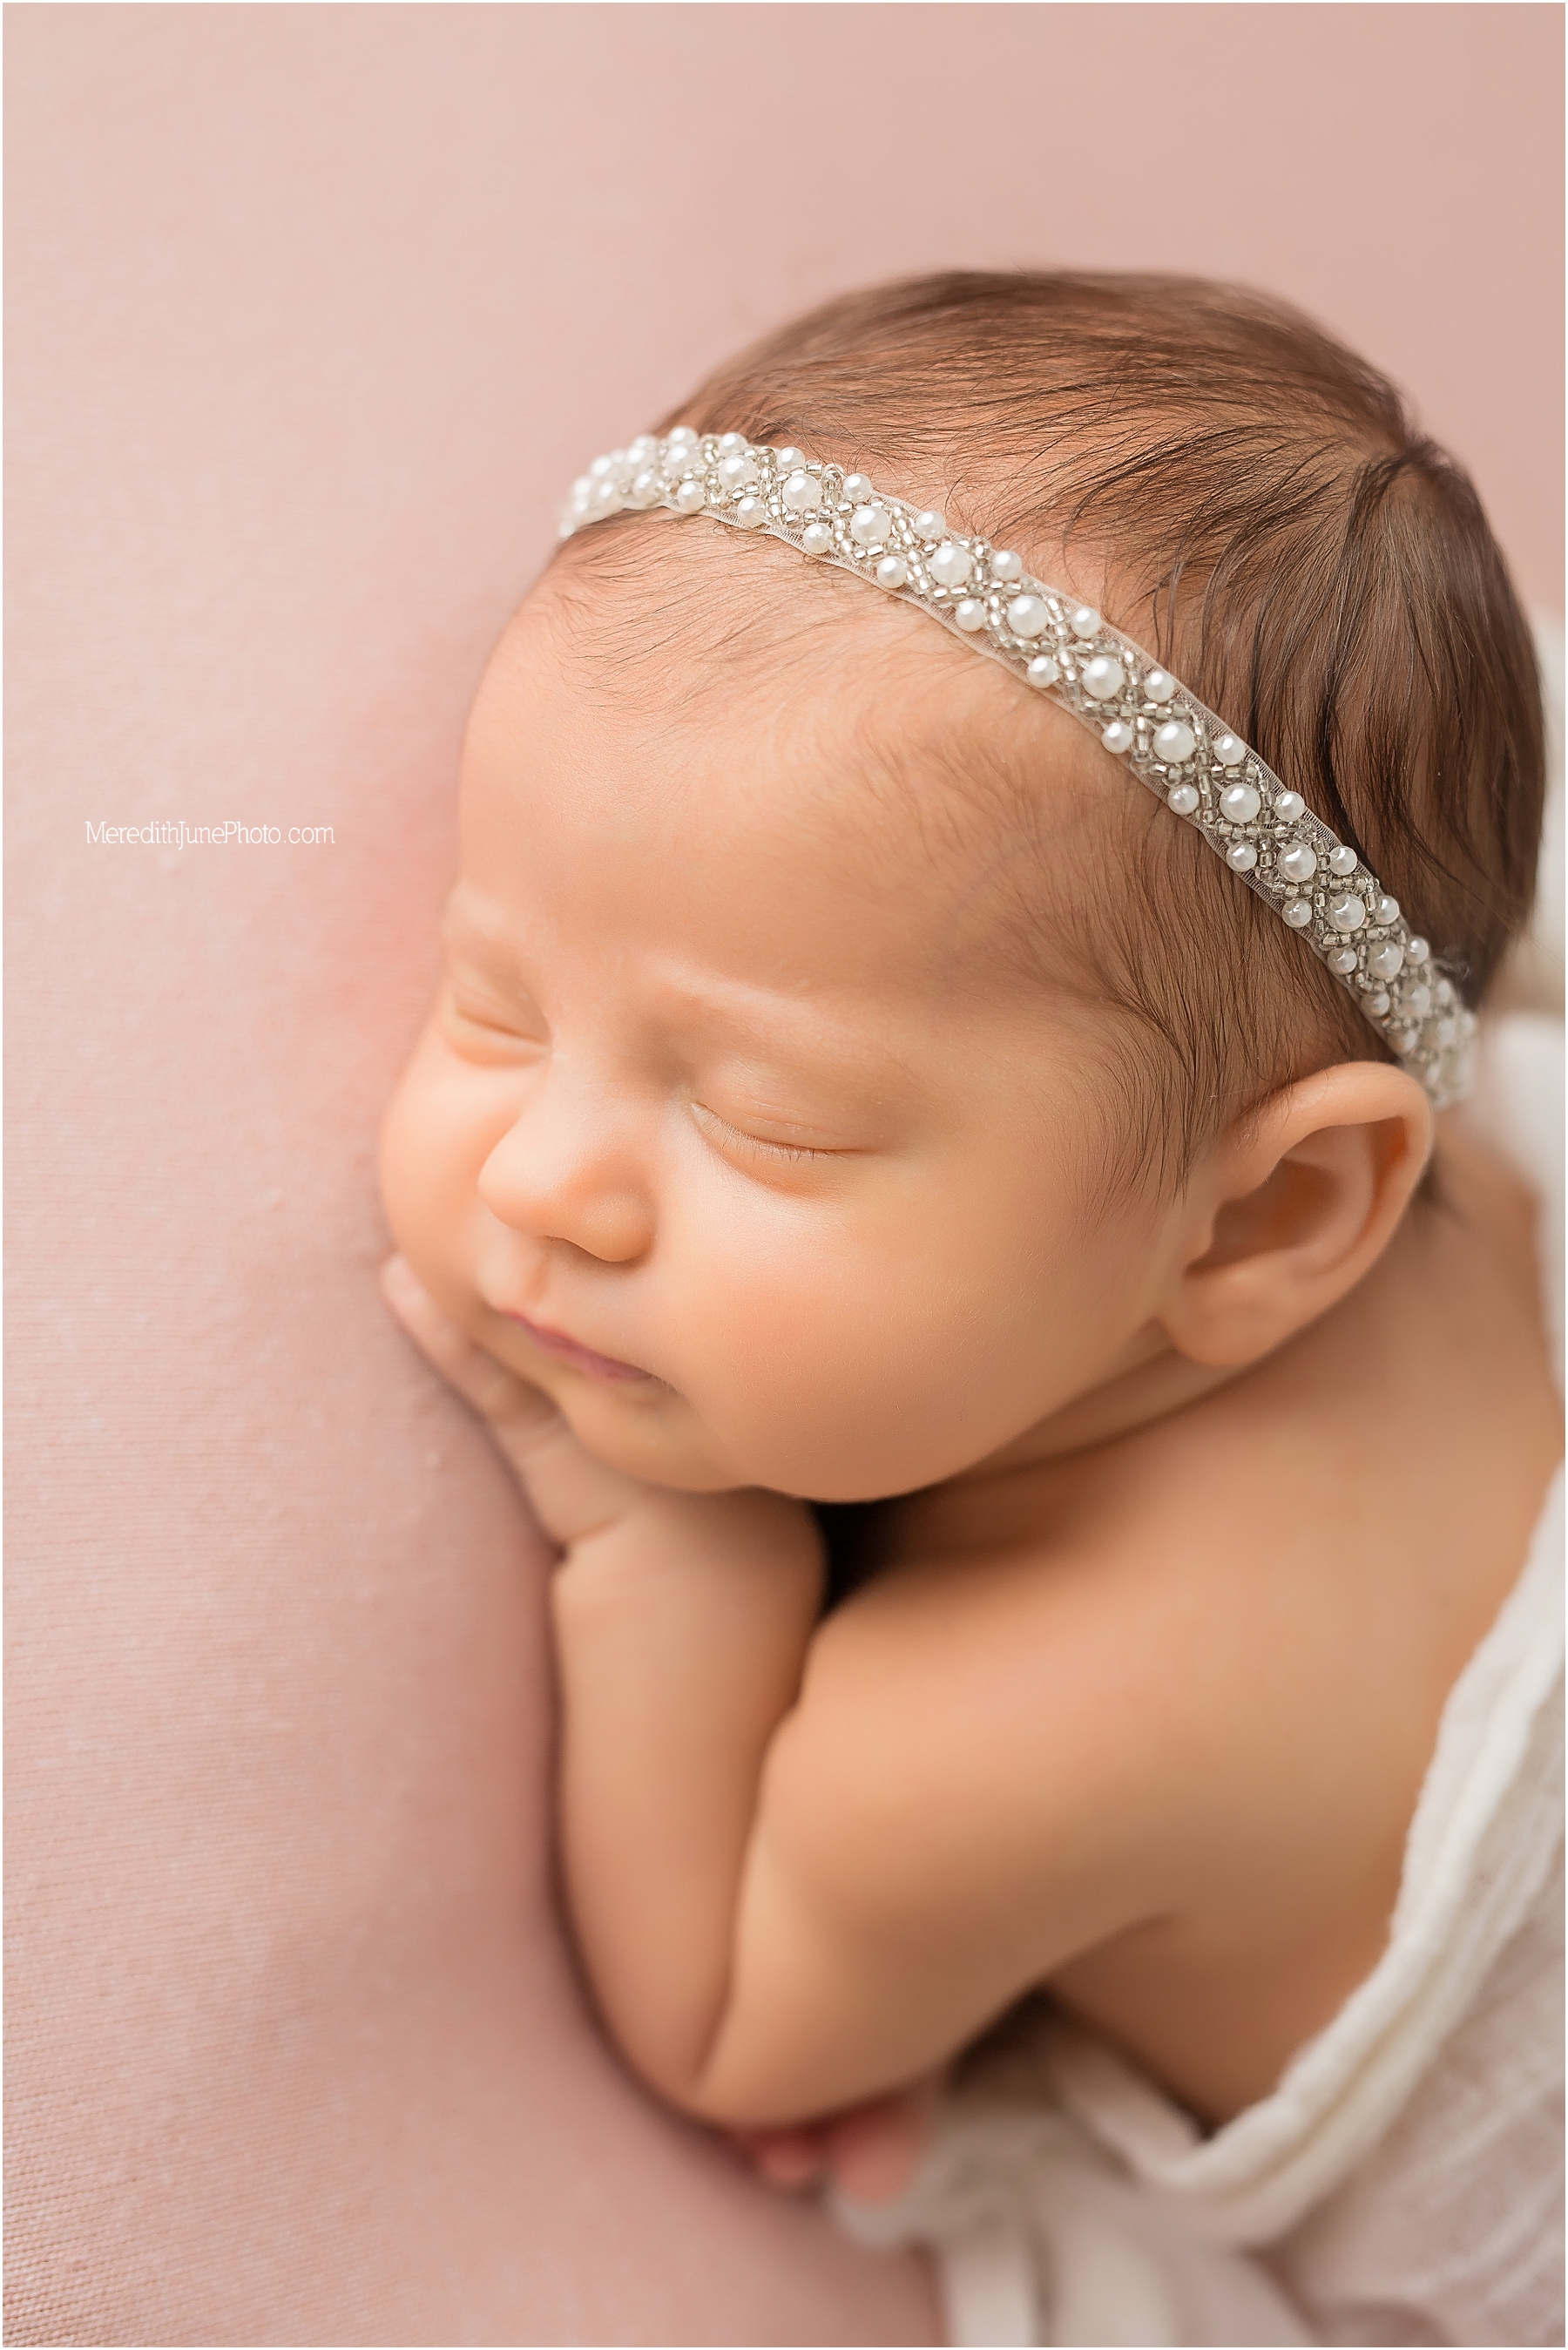 Newborn session for baby girl Mya at Meredith June Photography